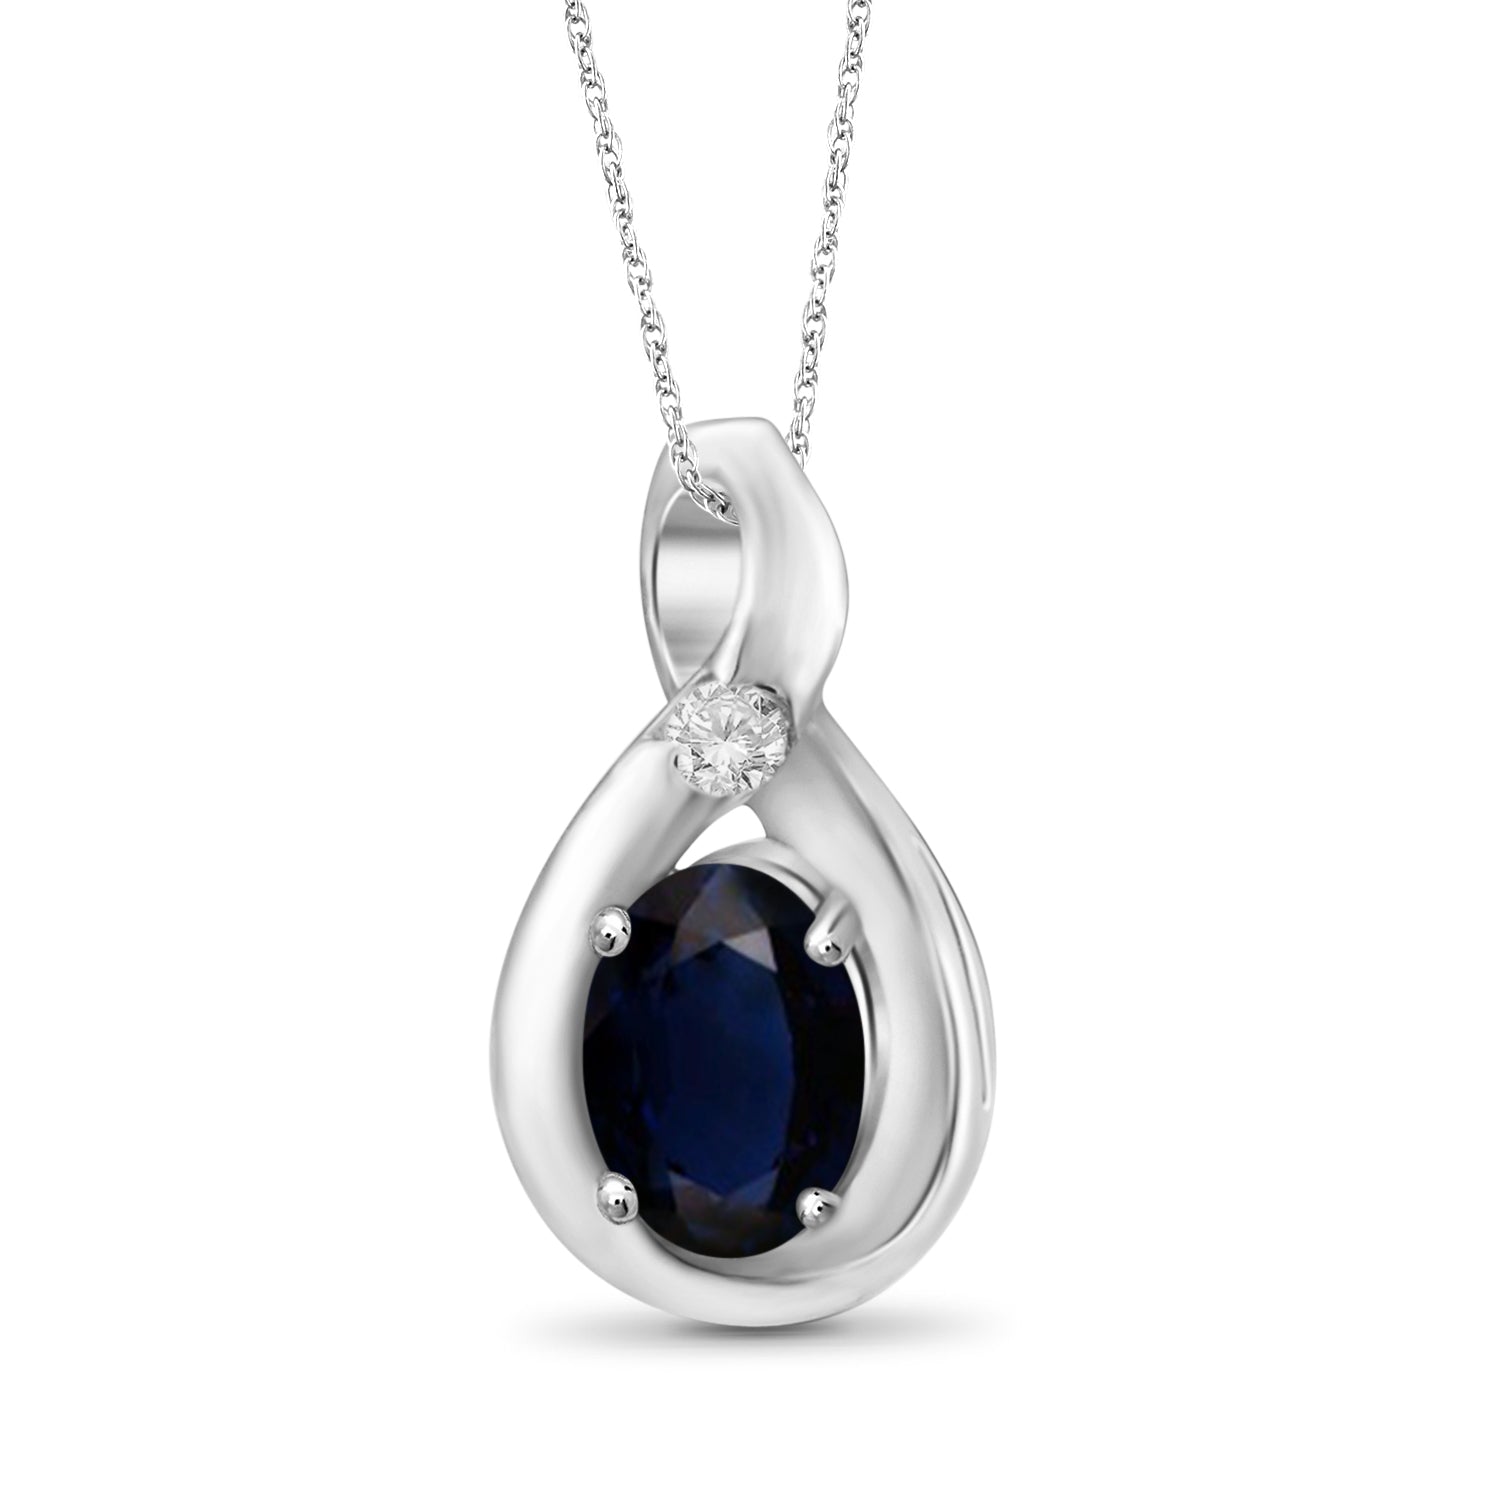 1/2 Carat T.G.W. Sapphire And White Diamond Accent Sterling Silver Or 14K Gold-Plated Pendant, 18"